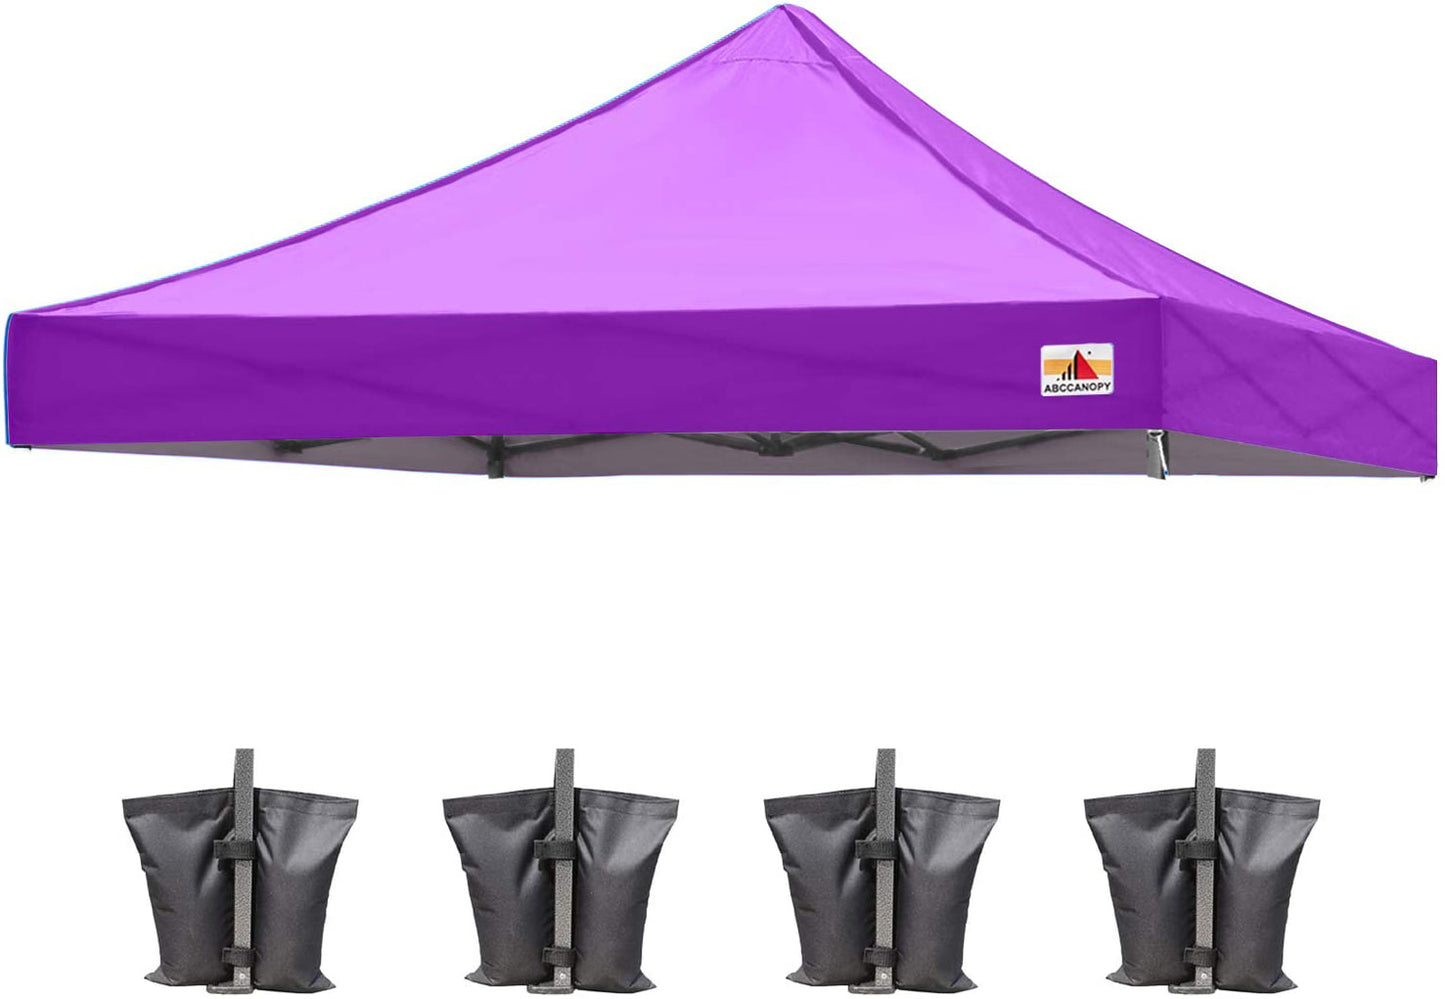 Featured in the photo is the Violet Canopy TOP created to enhance the ABCCANOPY Commercial Deluxe 10x10 Canopy. Its bright white design adds a touch of elegance to your outdoor events.